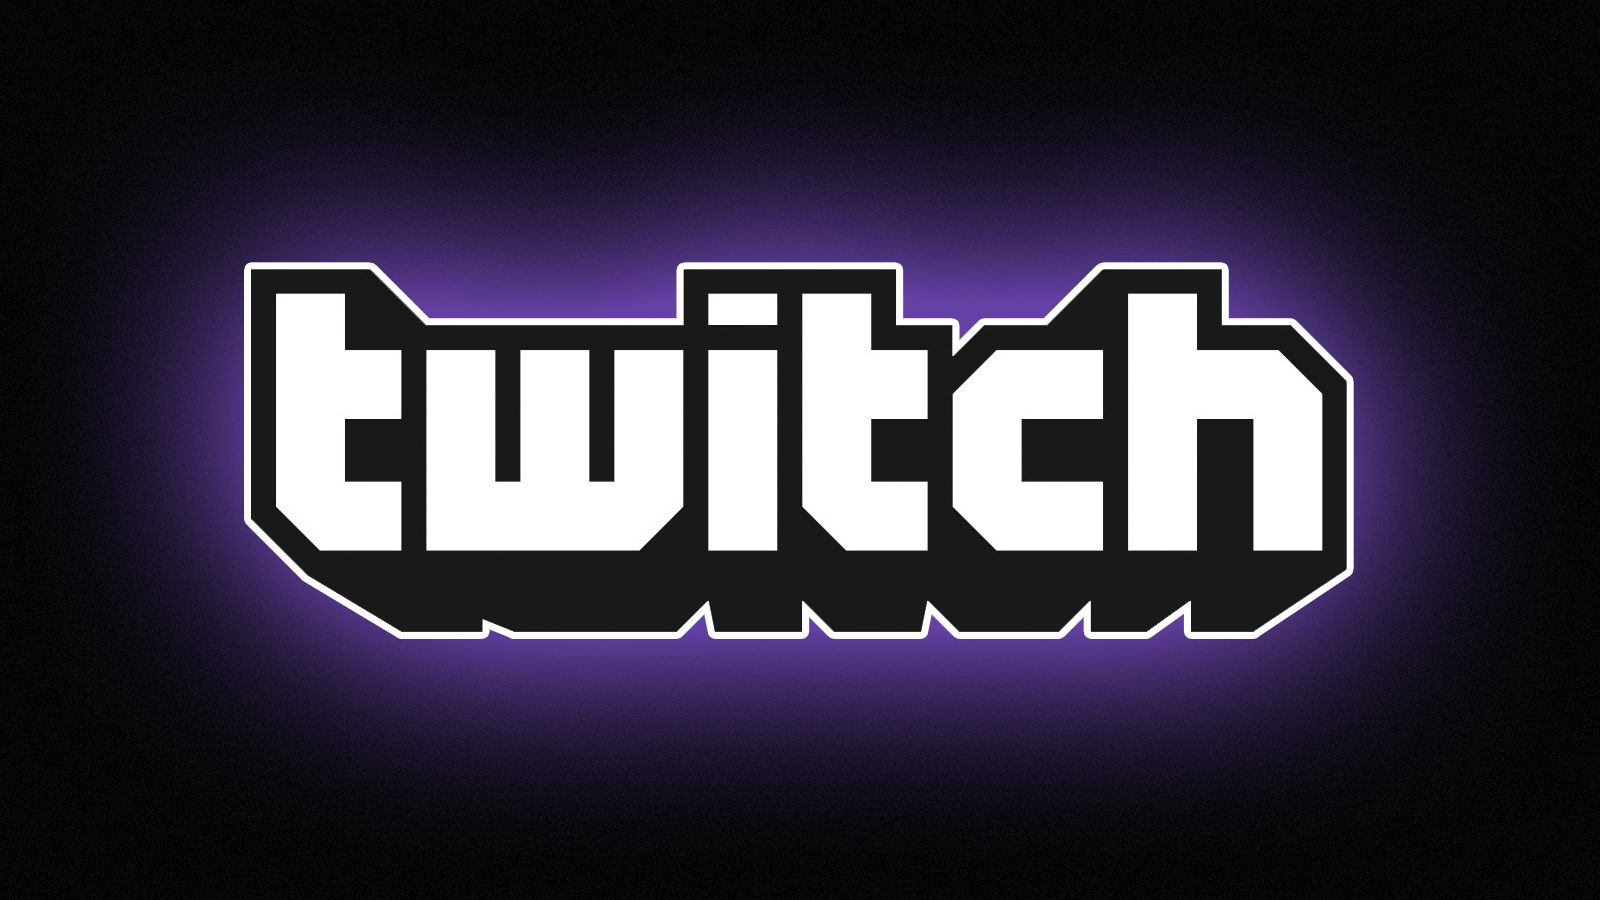 Twitch might be rolling out $10 and $25 channel sub tiers